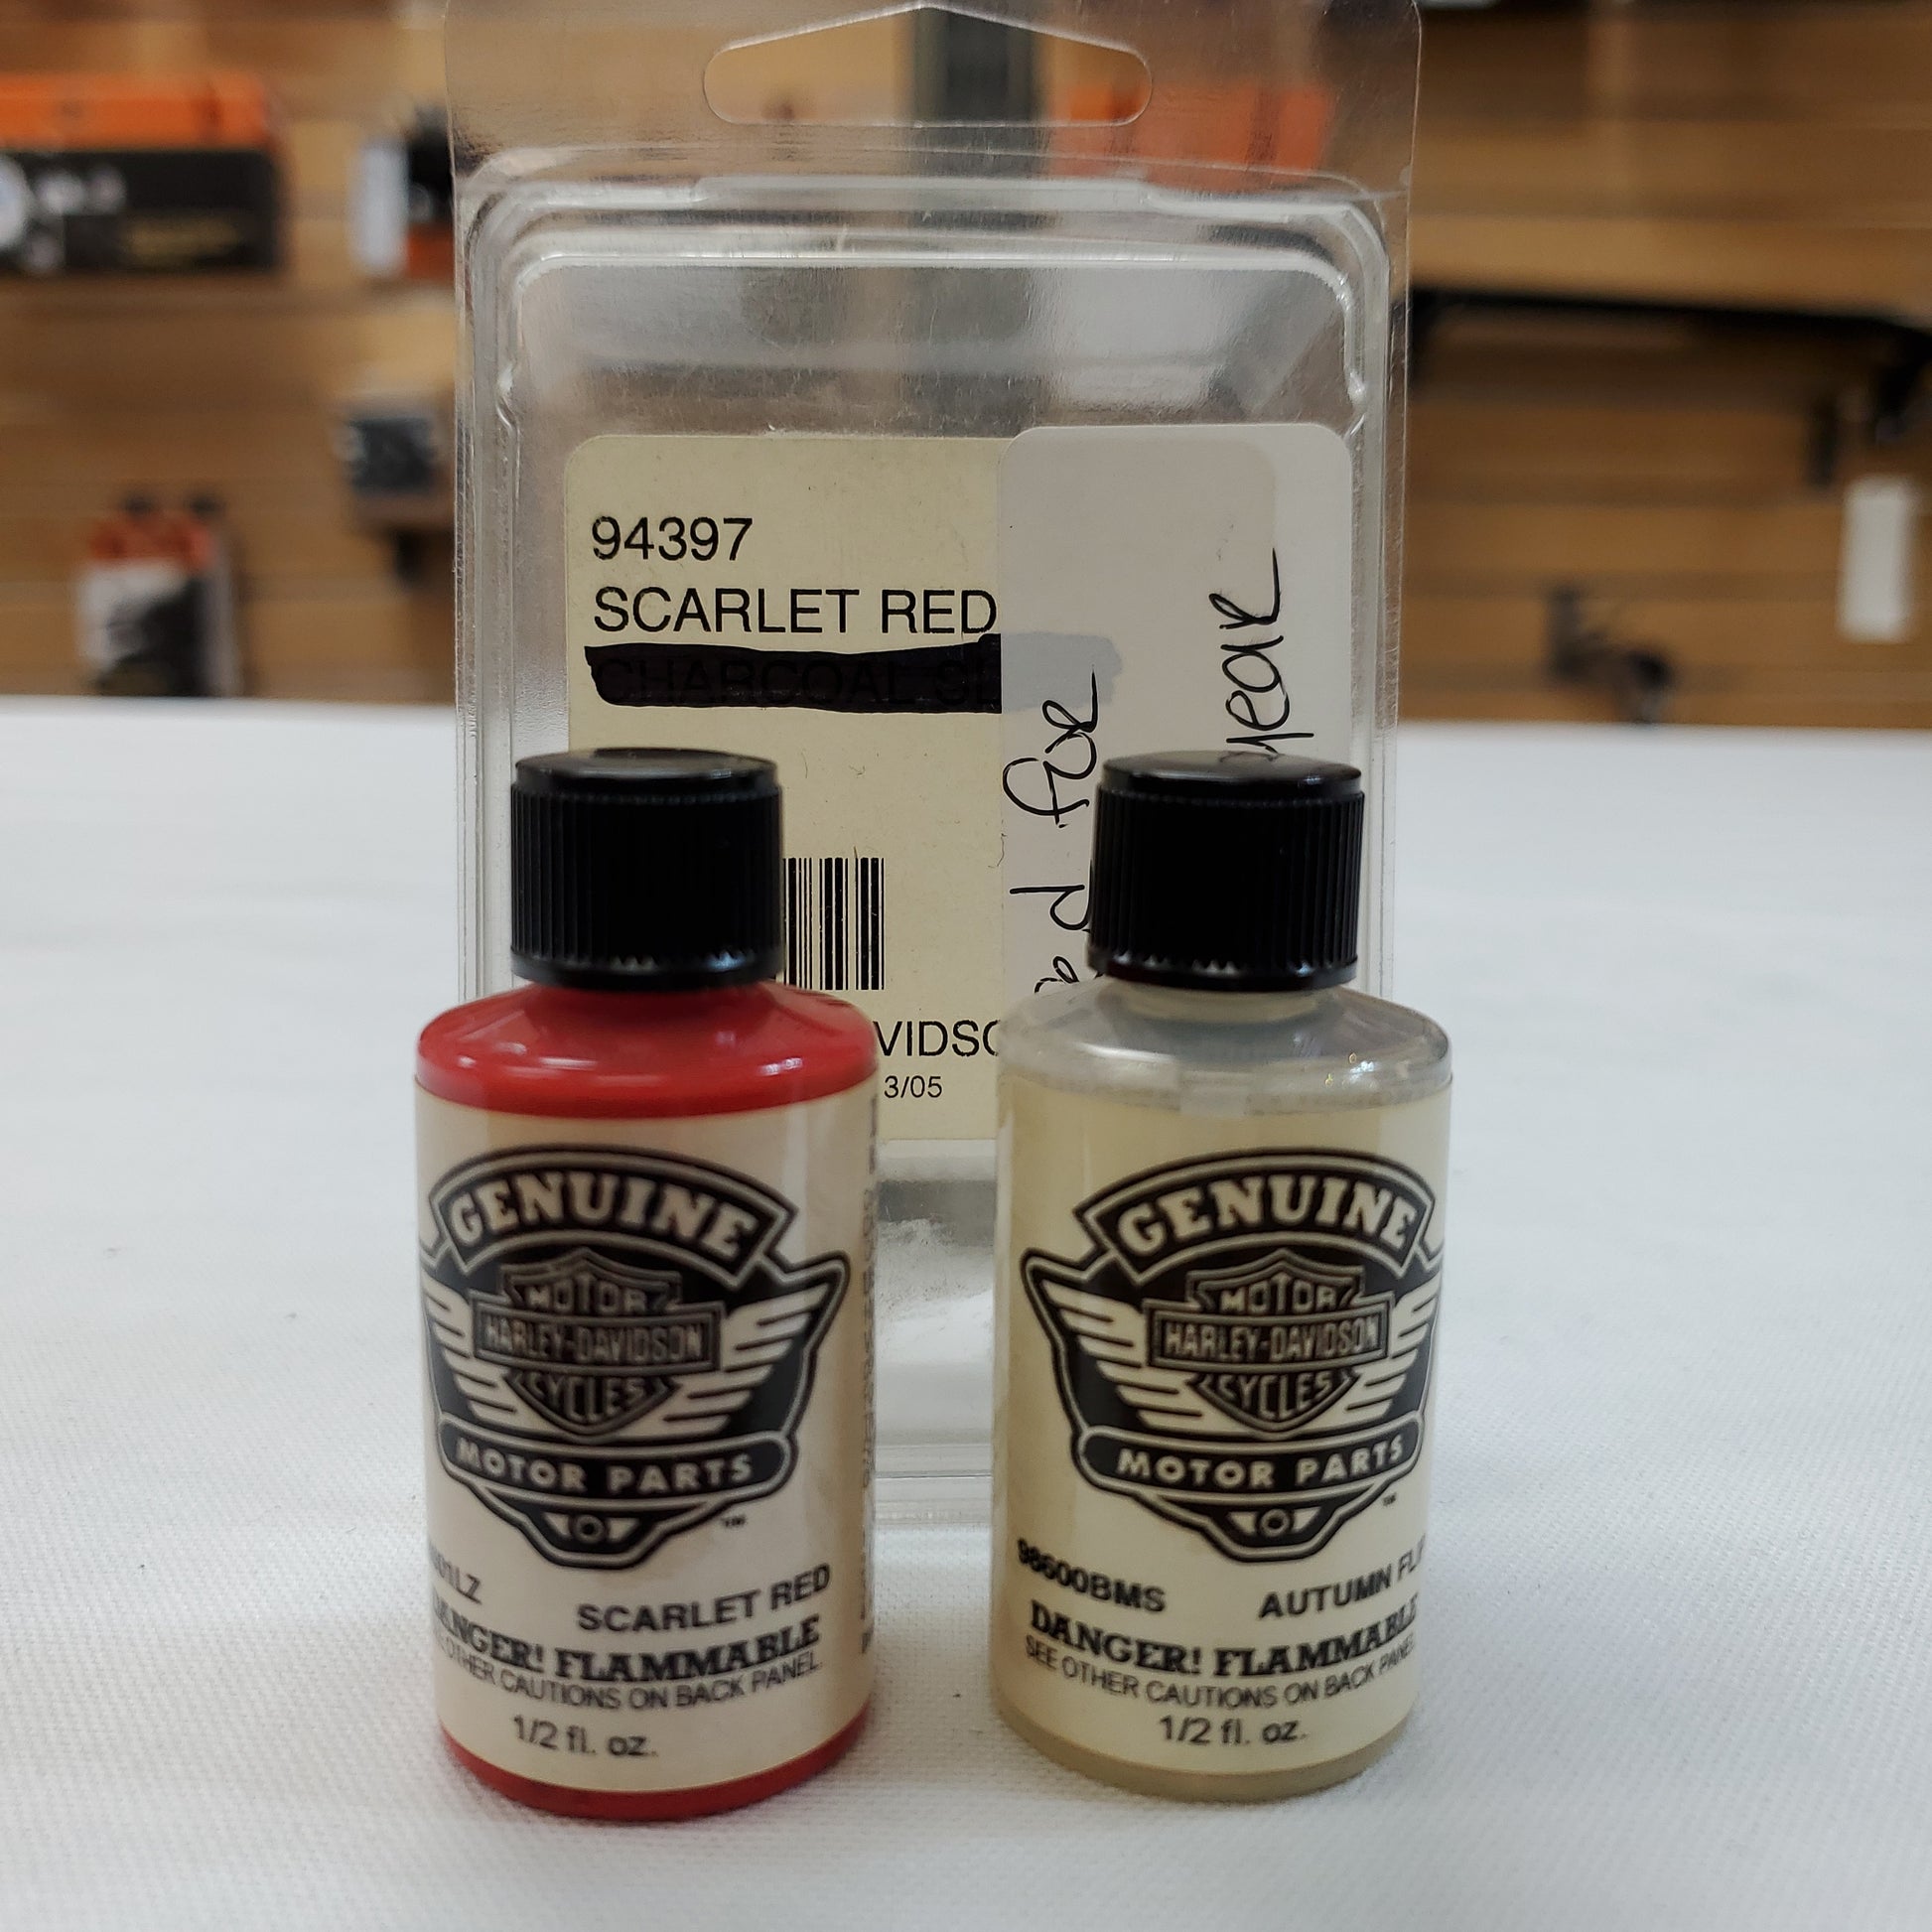 Genuine Harley-Davidson Touch up paint kit  #94397  Kit includes Scarlet red and Clear Top Coat  Color is used for 2011 model year